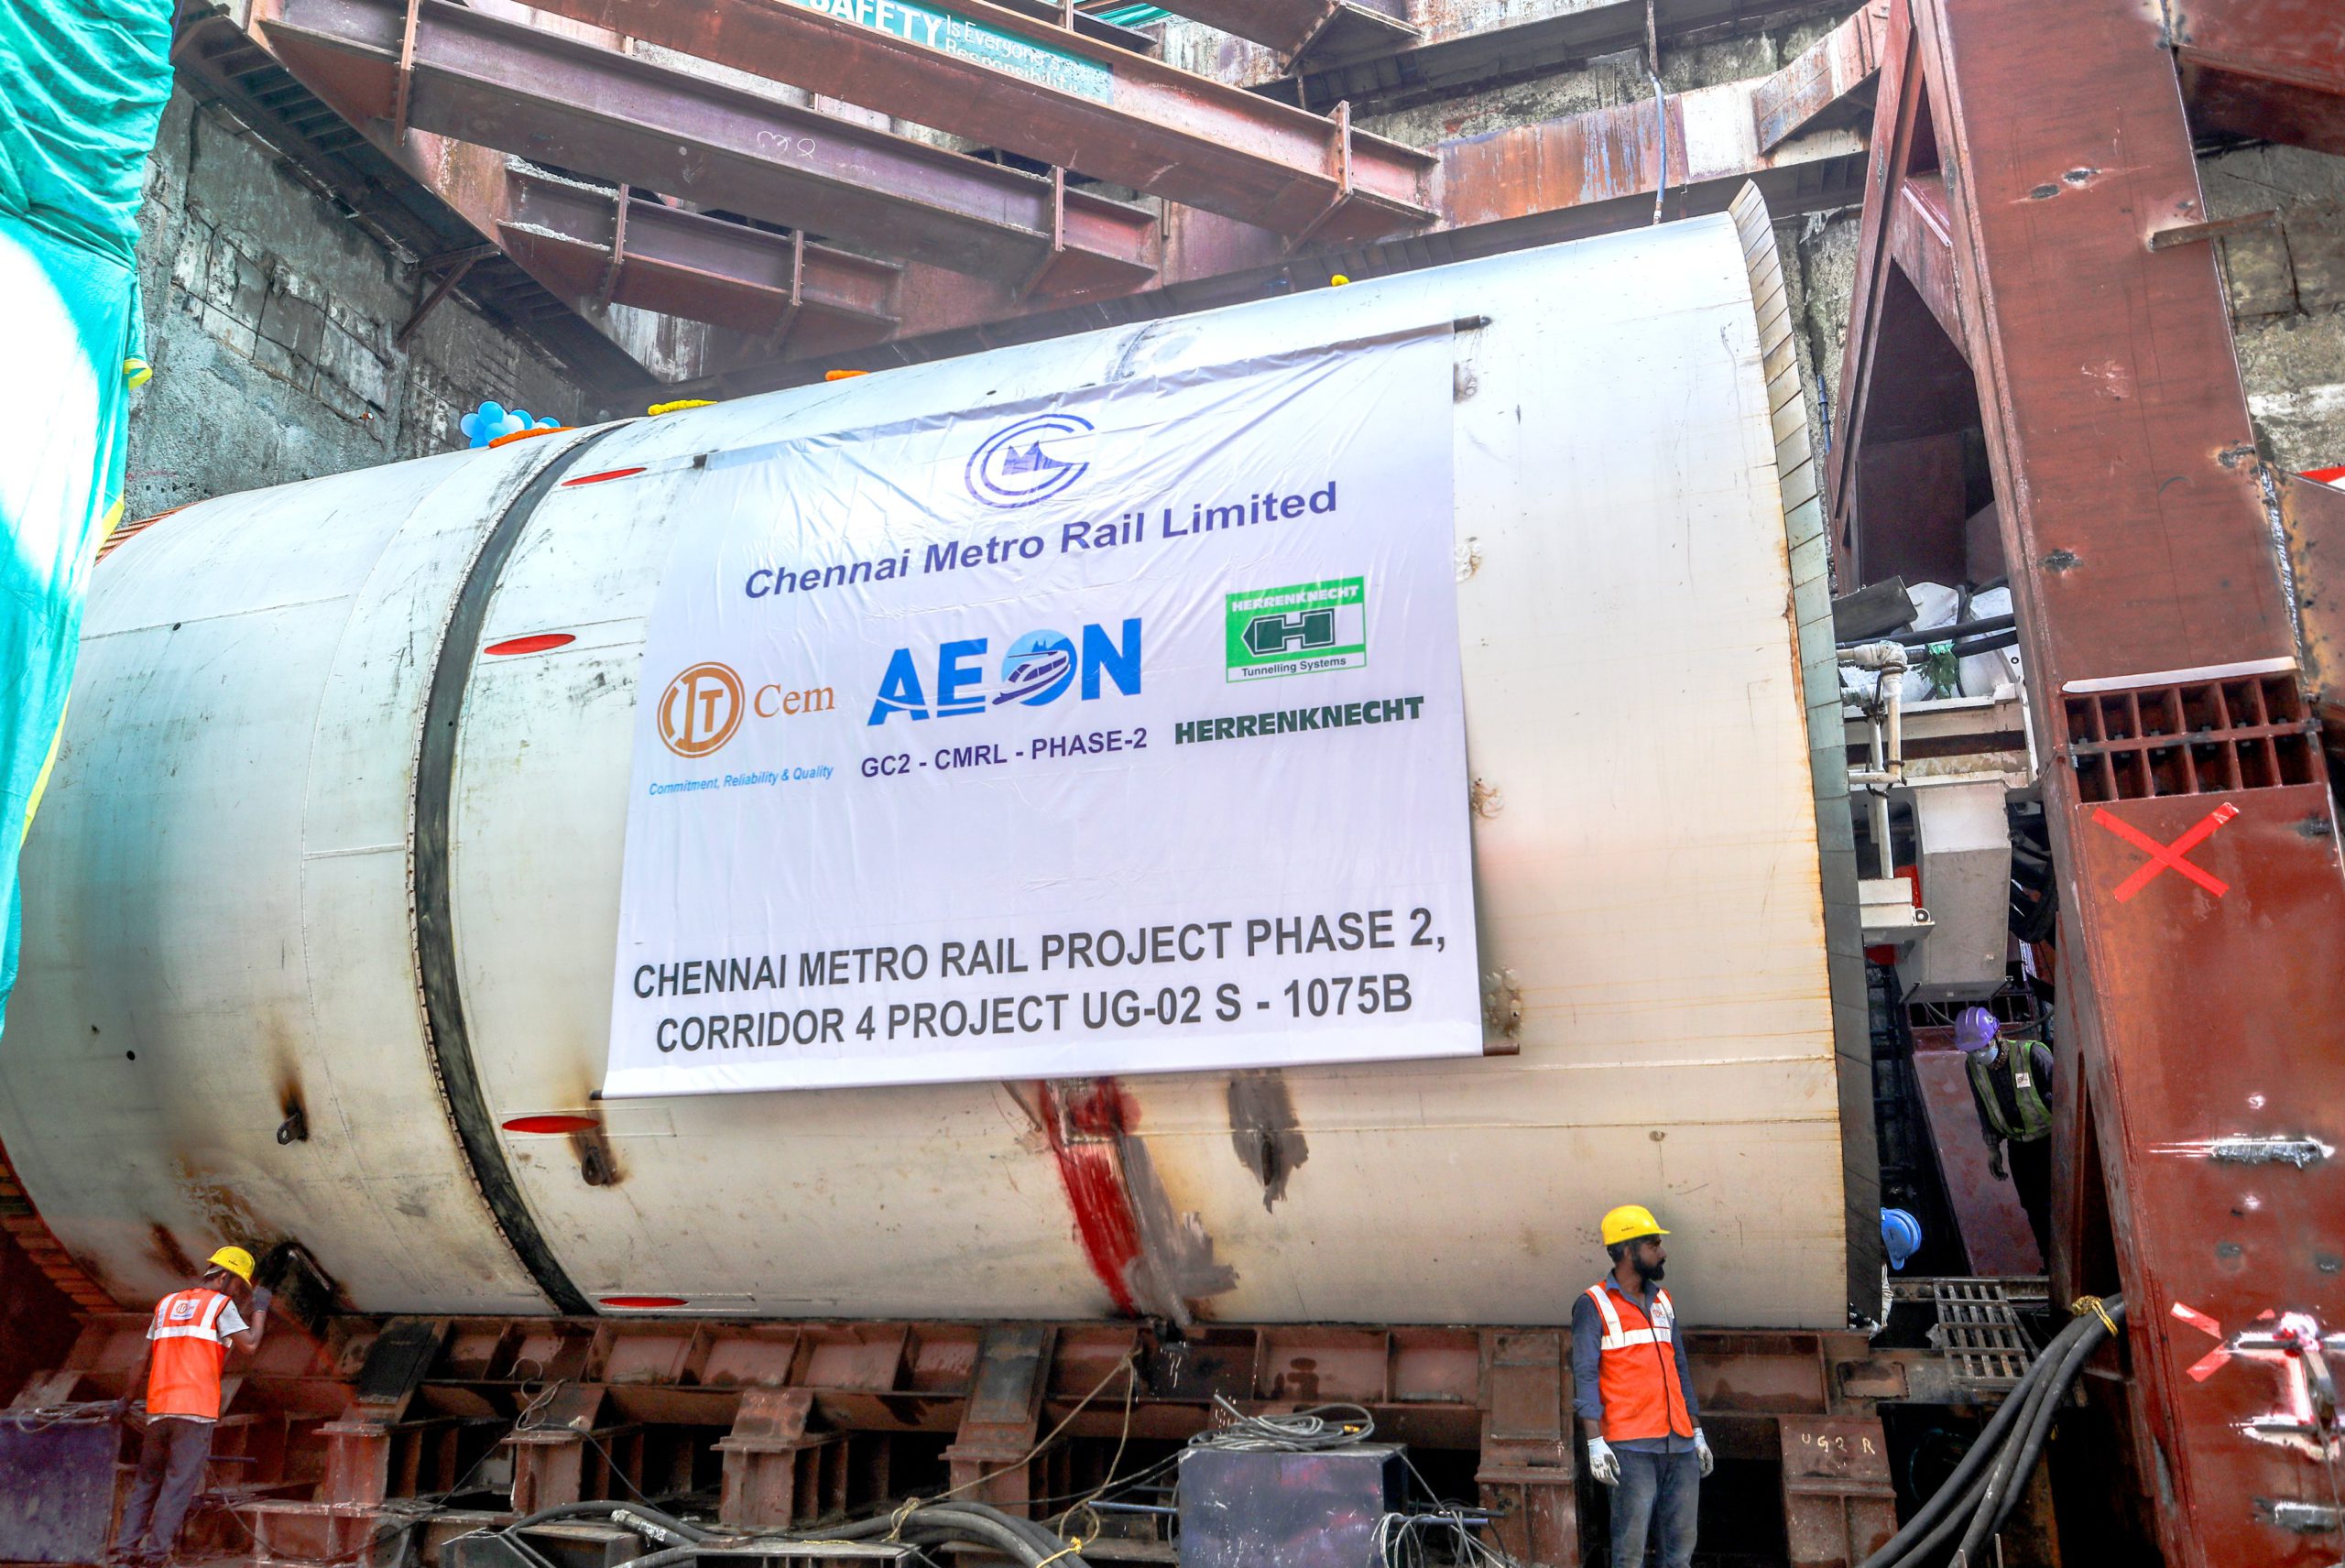 TBM Pelican of Chennai Metro Launched Yesterday at Panagal Park Station